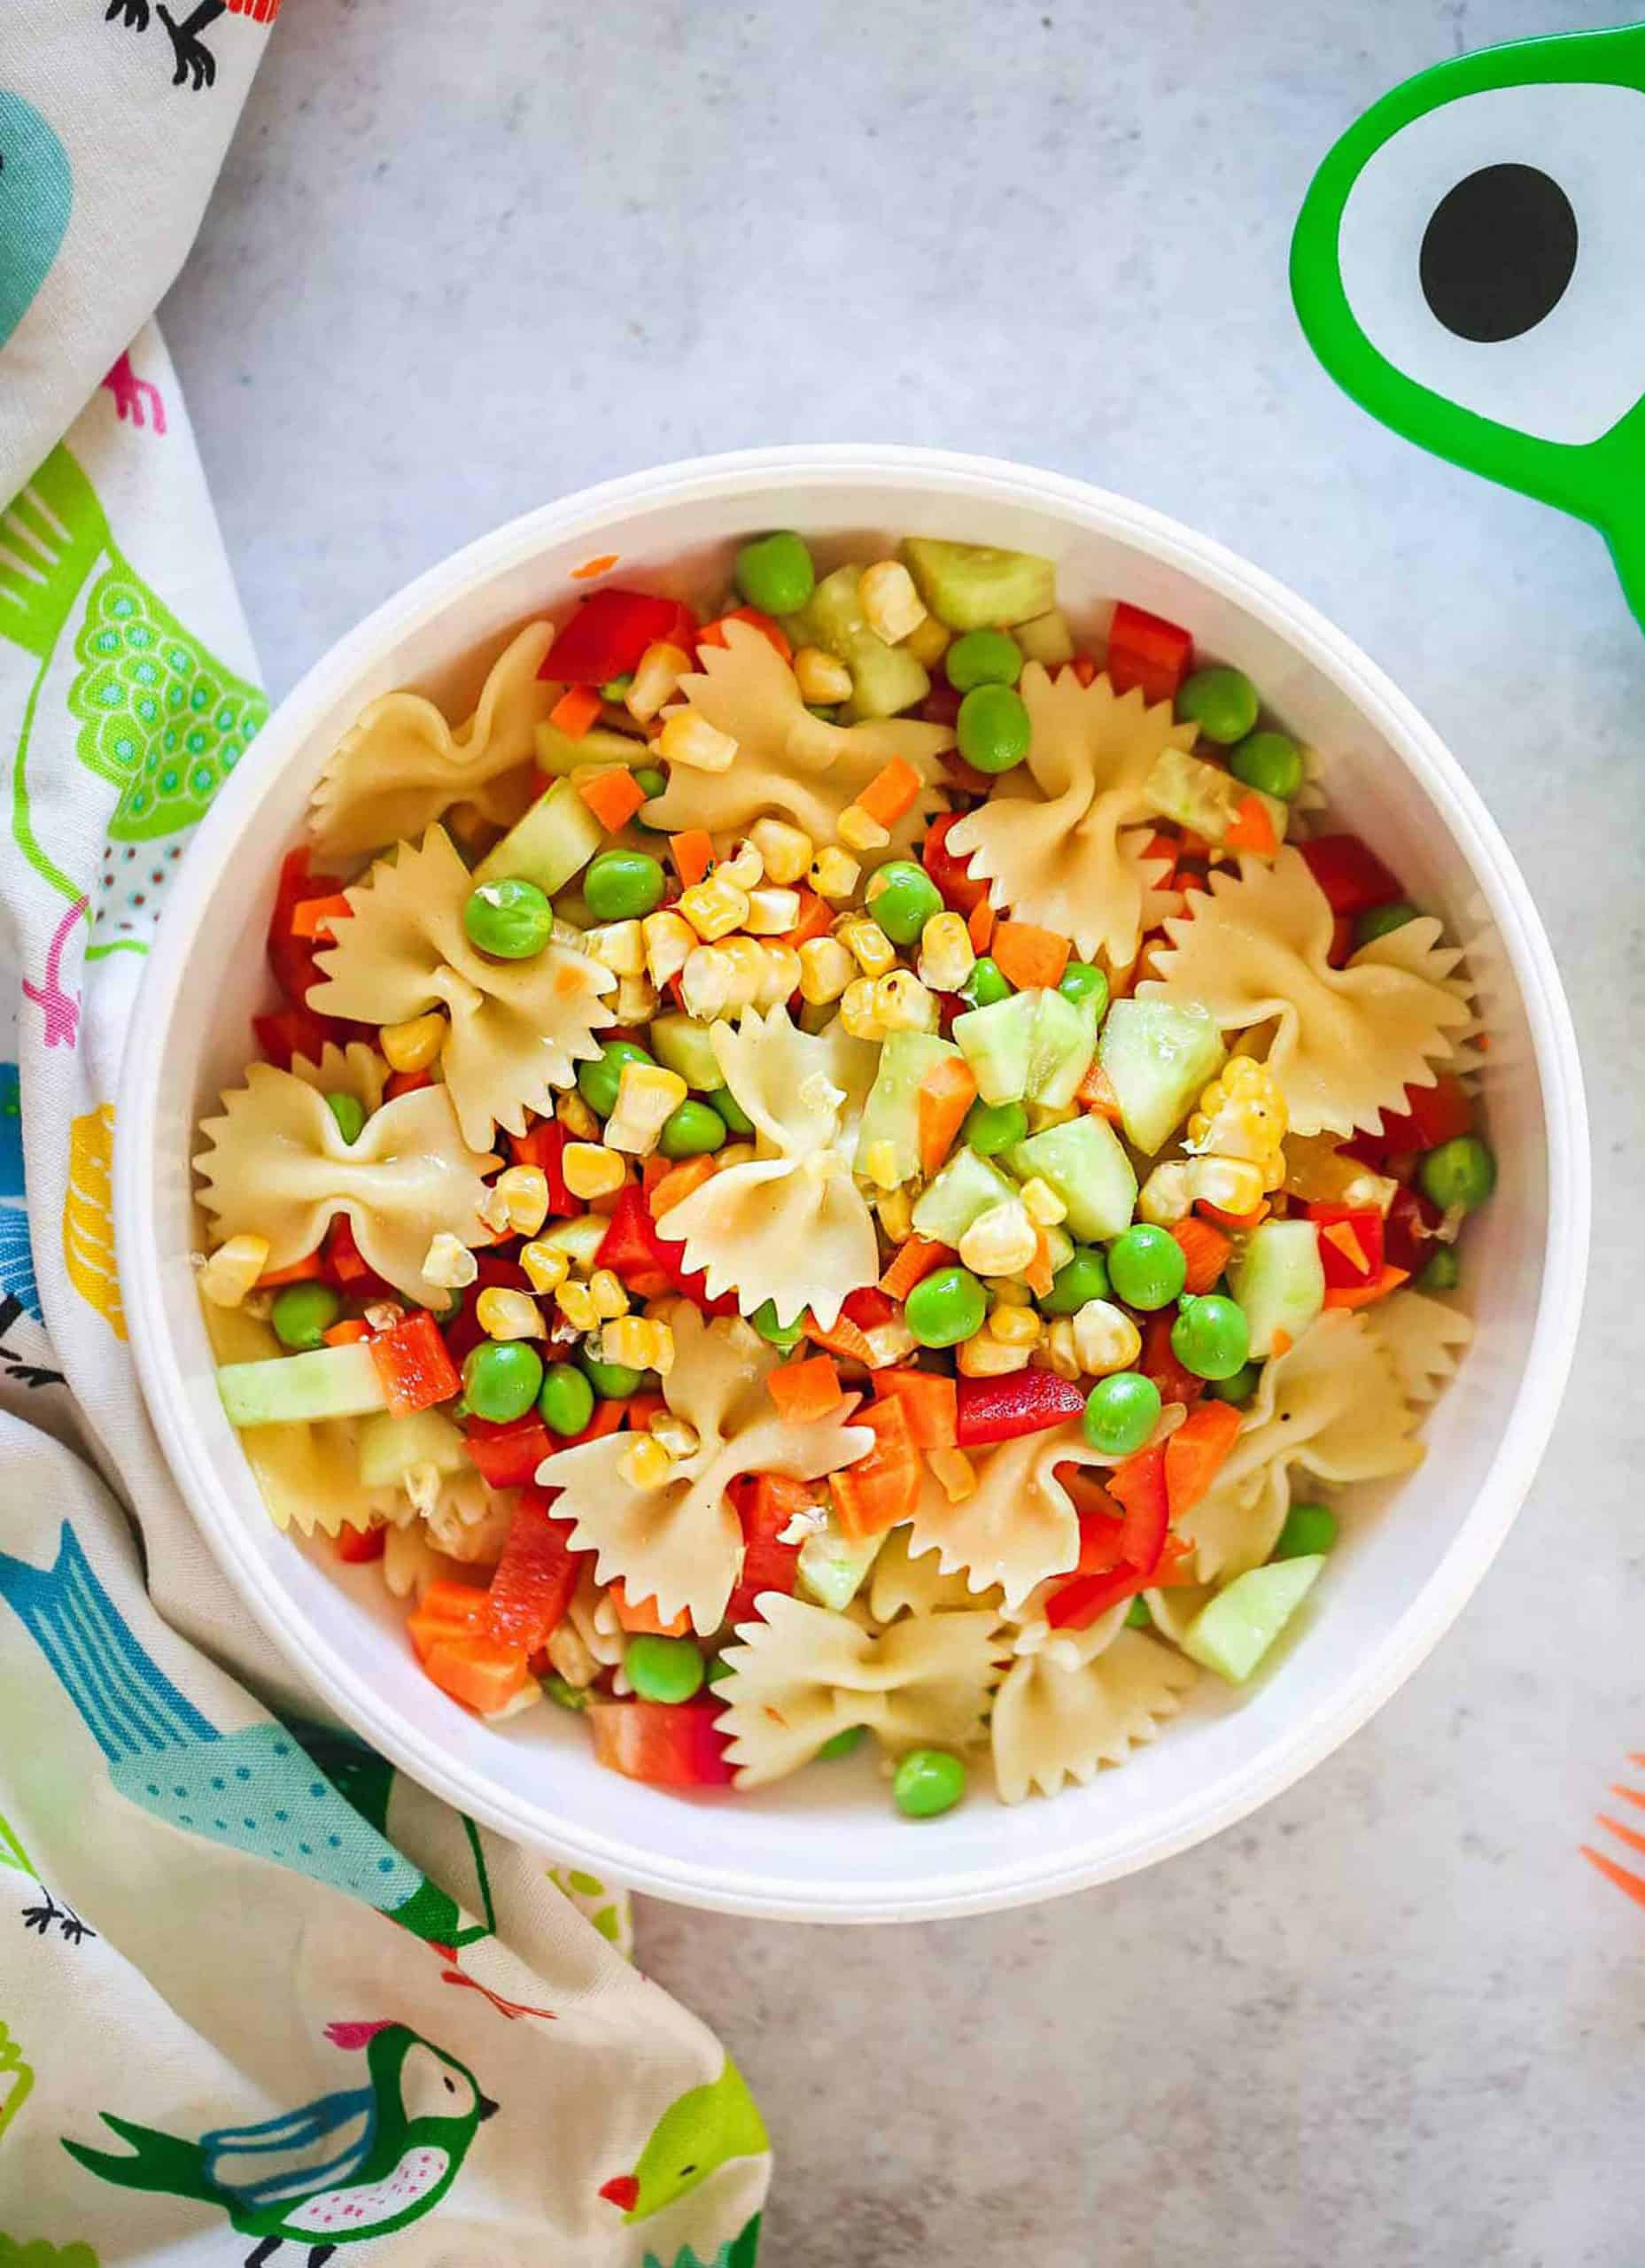 Macaroni Salad With Cheese Cubes
 10 HEALTHY LUNCH BOX IDEAS FOR SCHOOL The clever meal